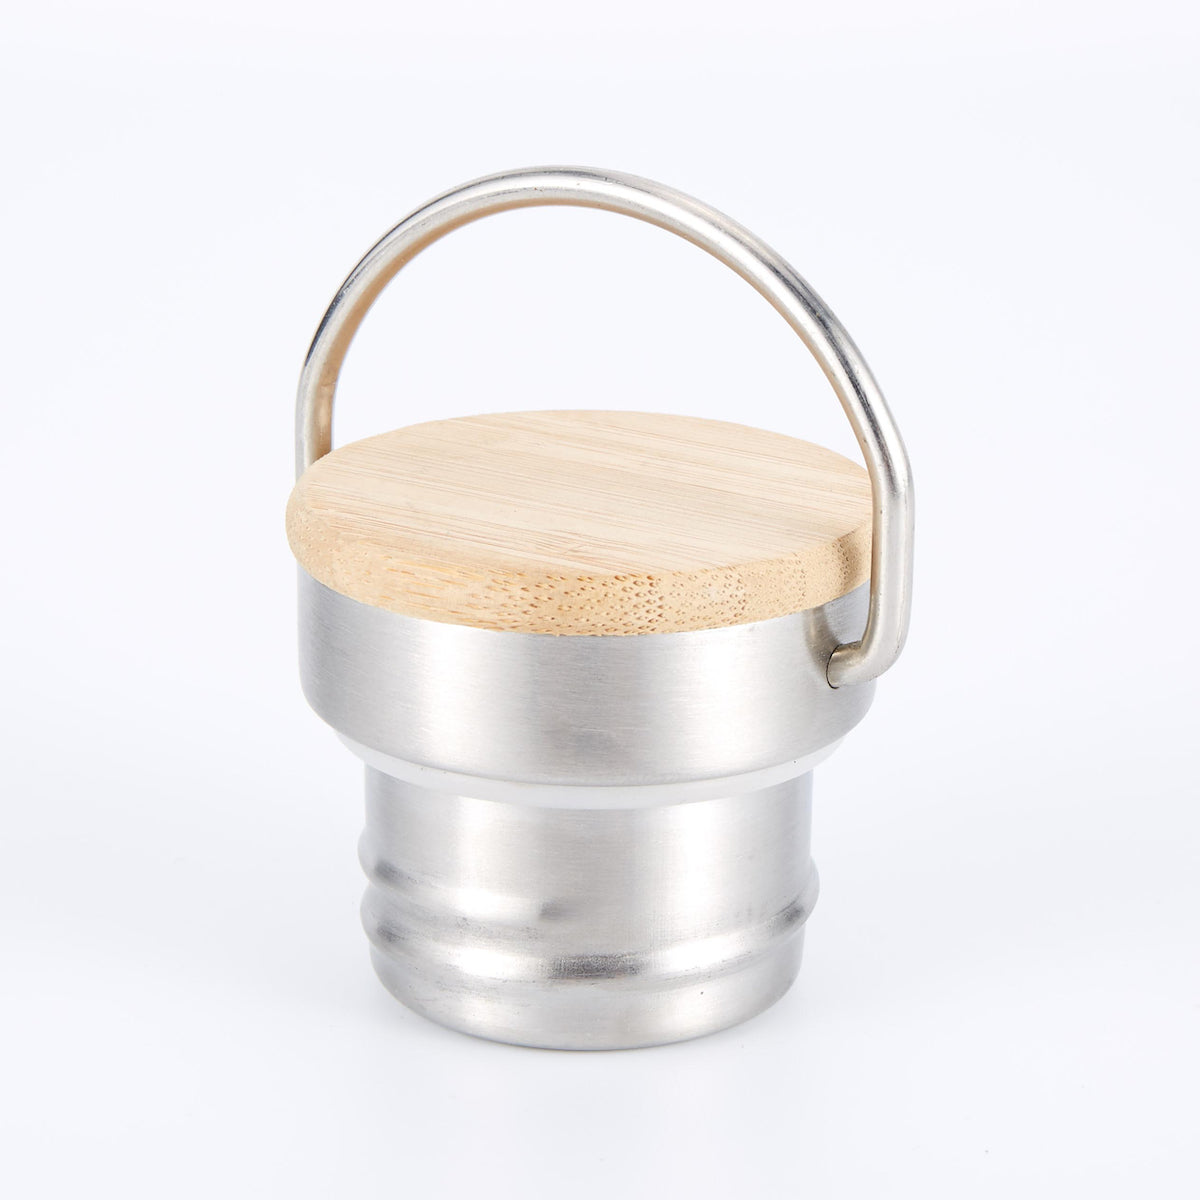 Bamboo lid for stainless steel water bottle created by the Parks Conservancy